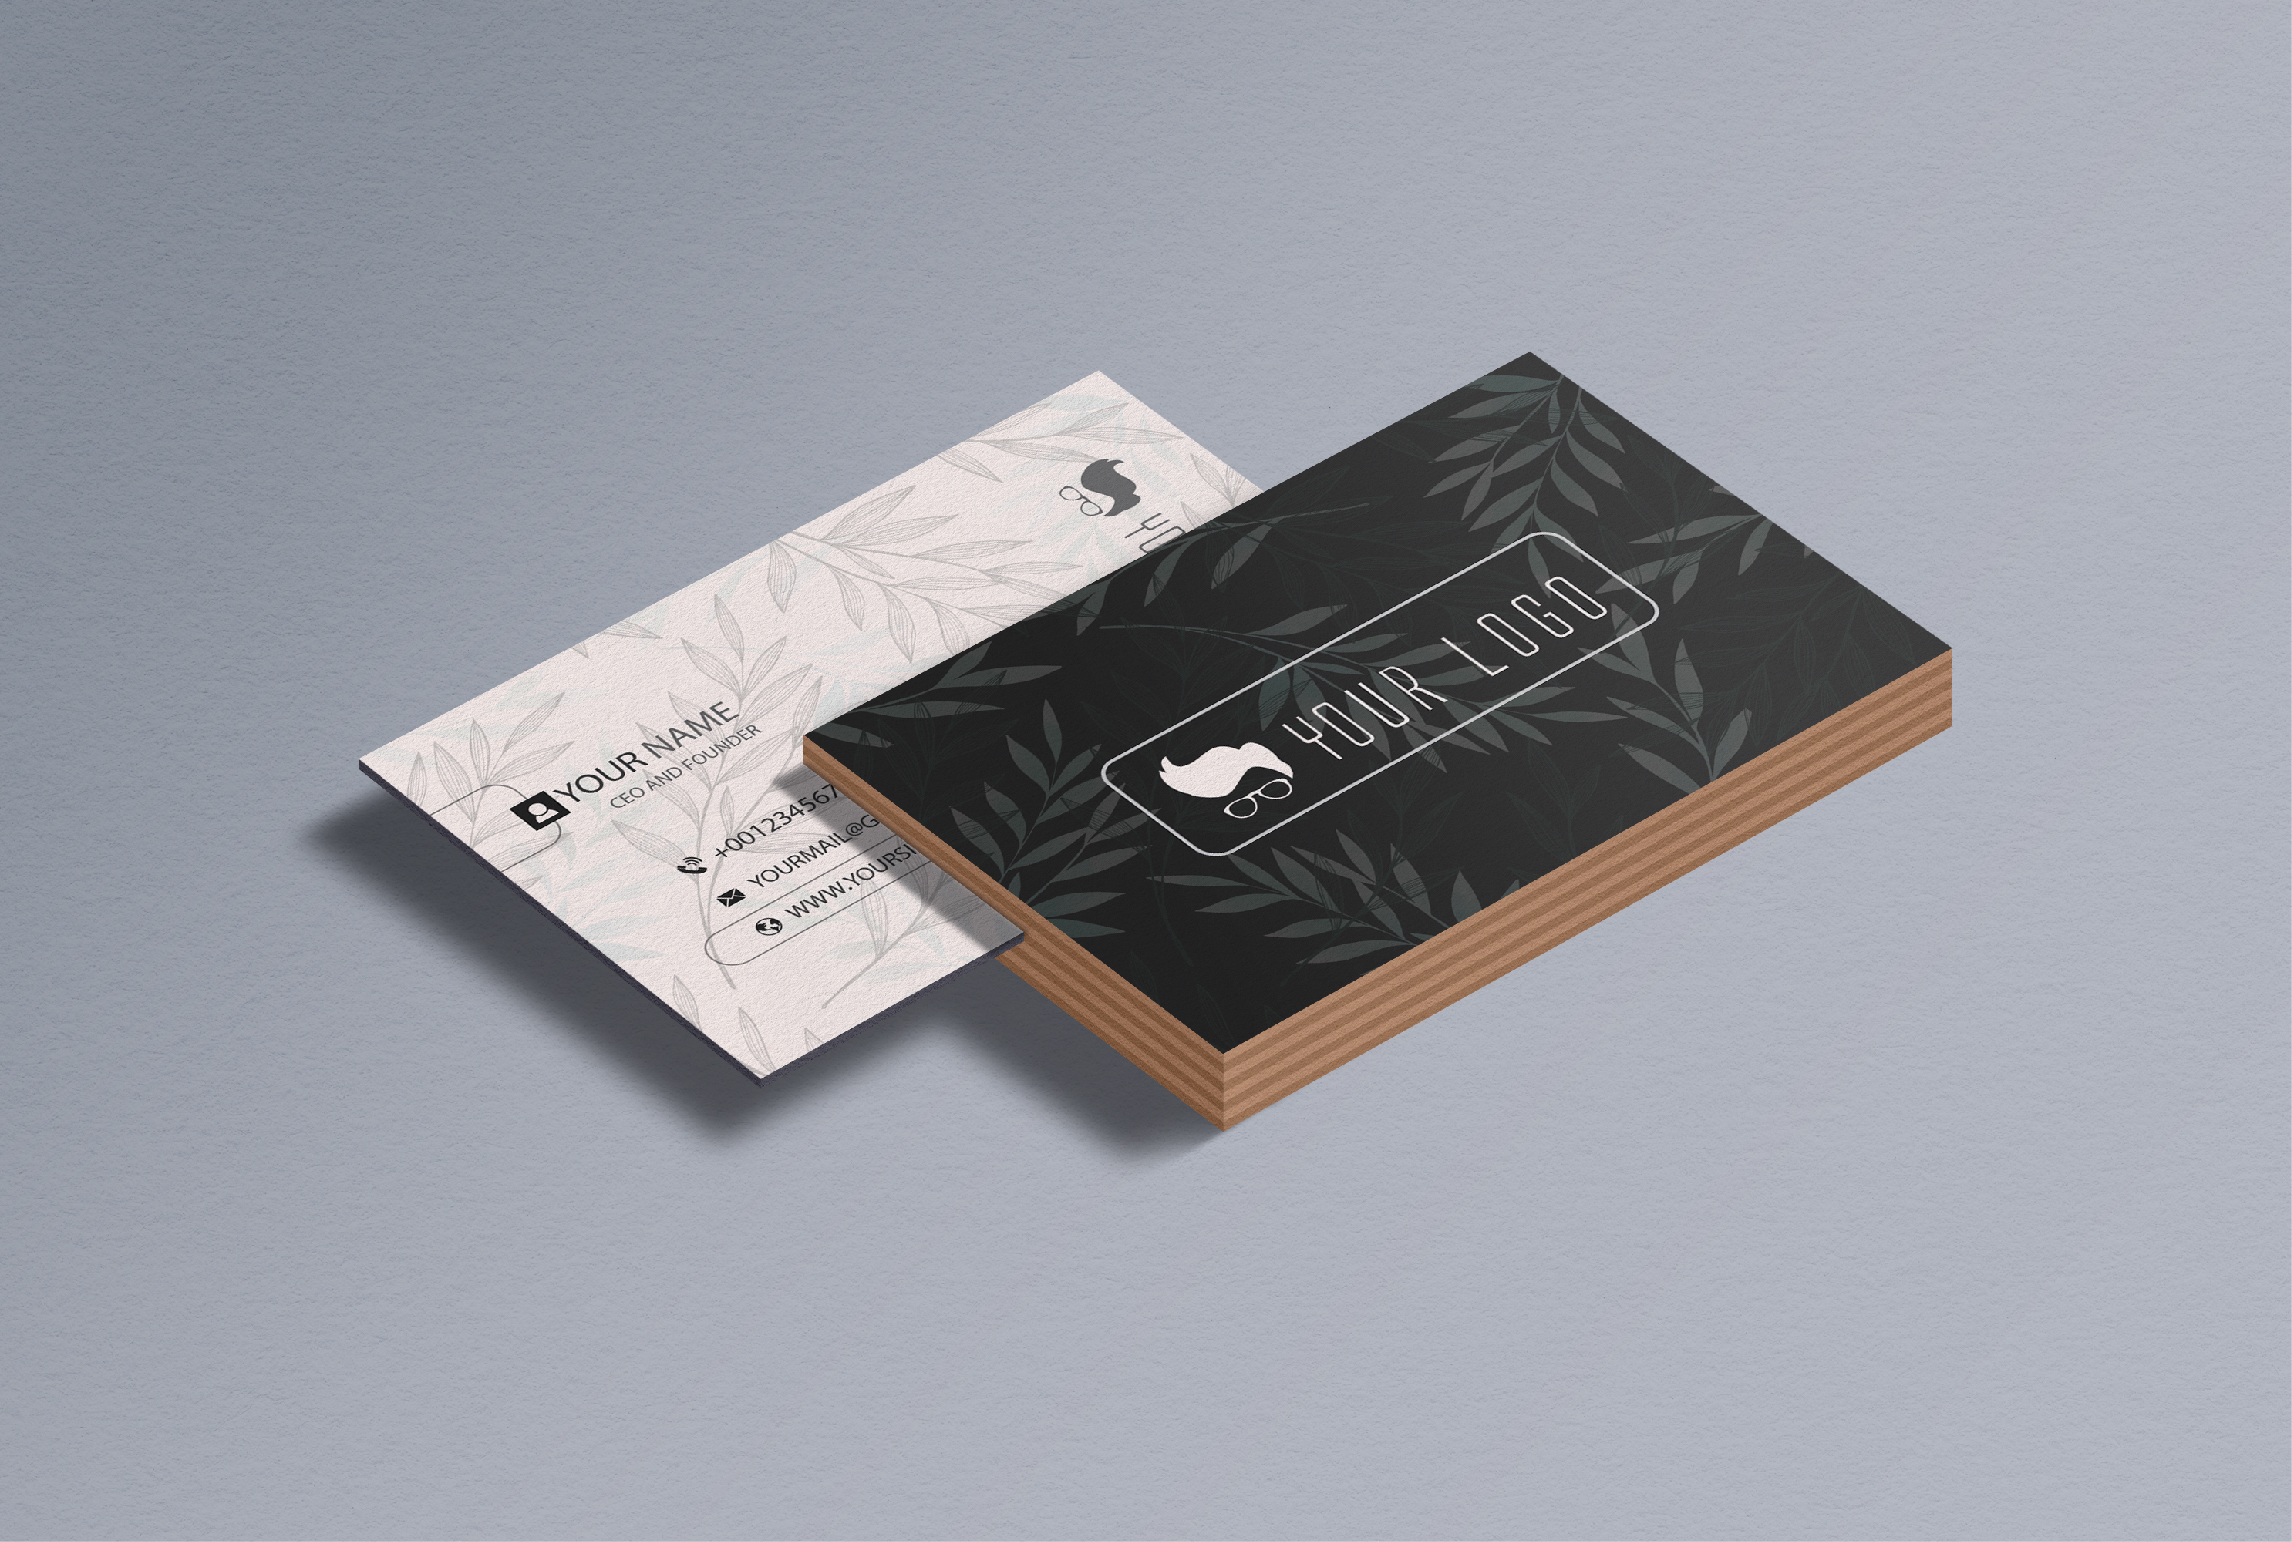 I Will Design Creative Business Card in 12 Hours